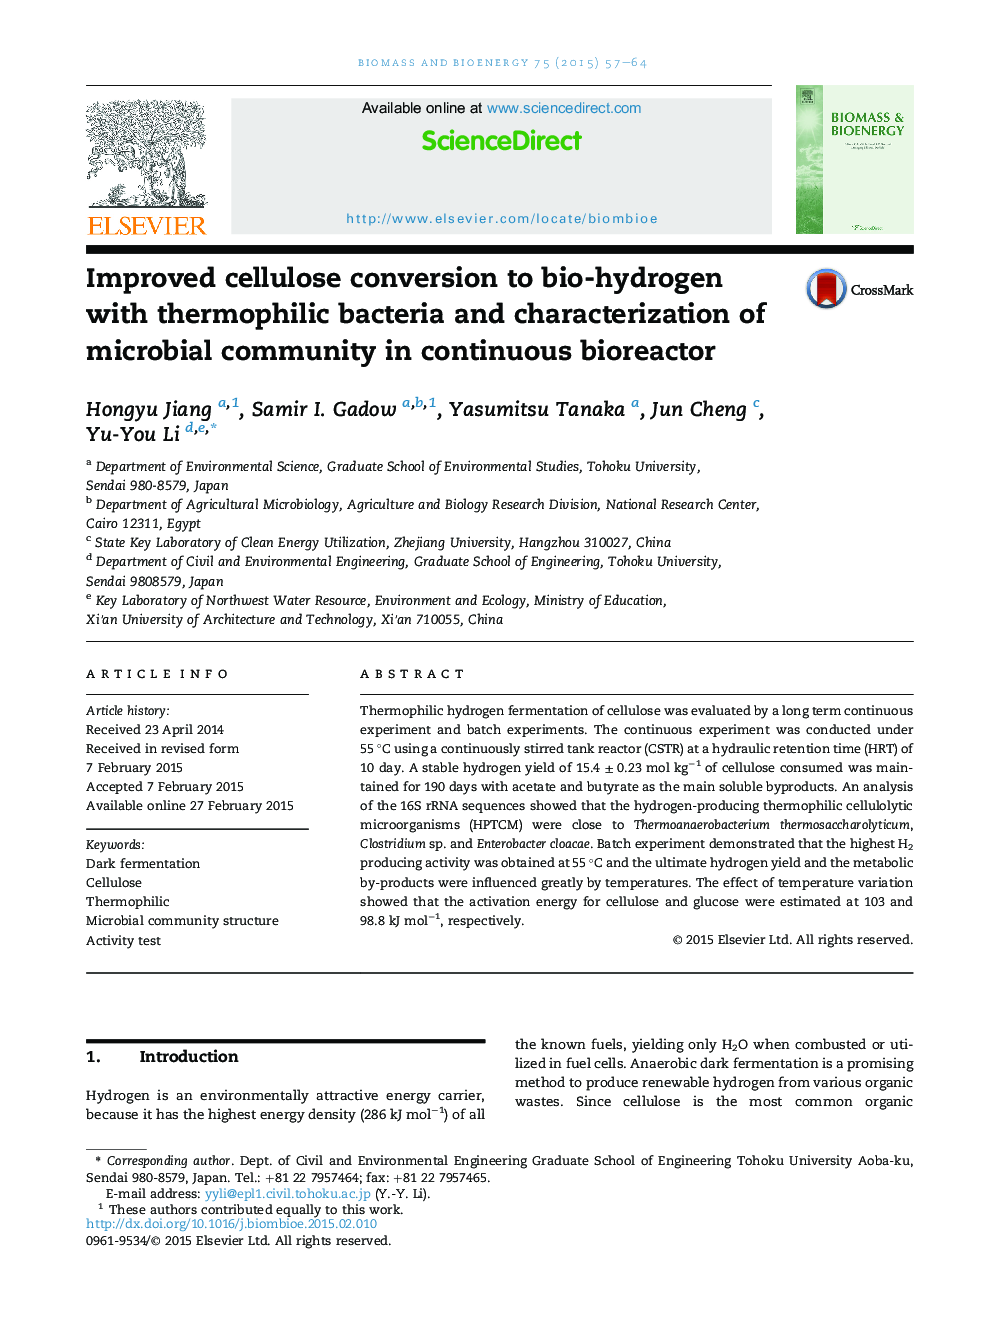 Improved cellulose conversion to bio-hydrogen with thermophilic bacteria and characterization of microbial community in continuous bioreactor